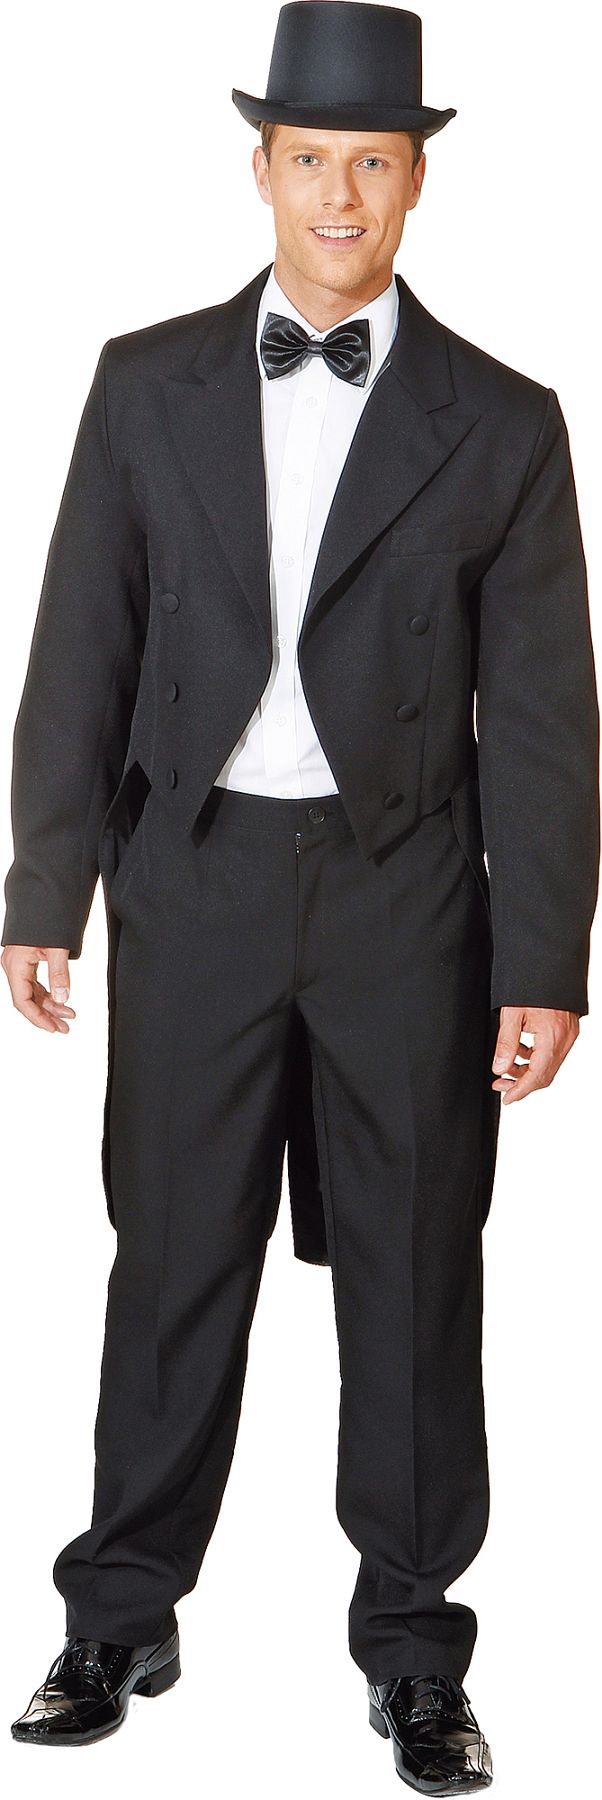 Gents tailcoat, black - High quality